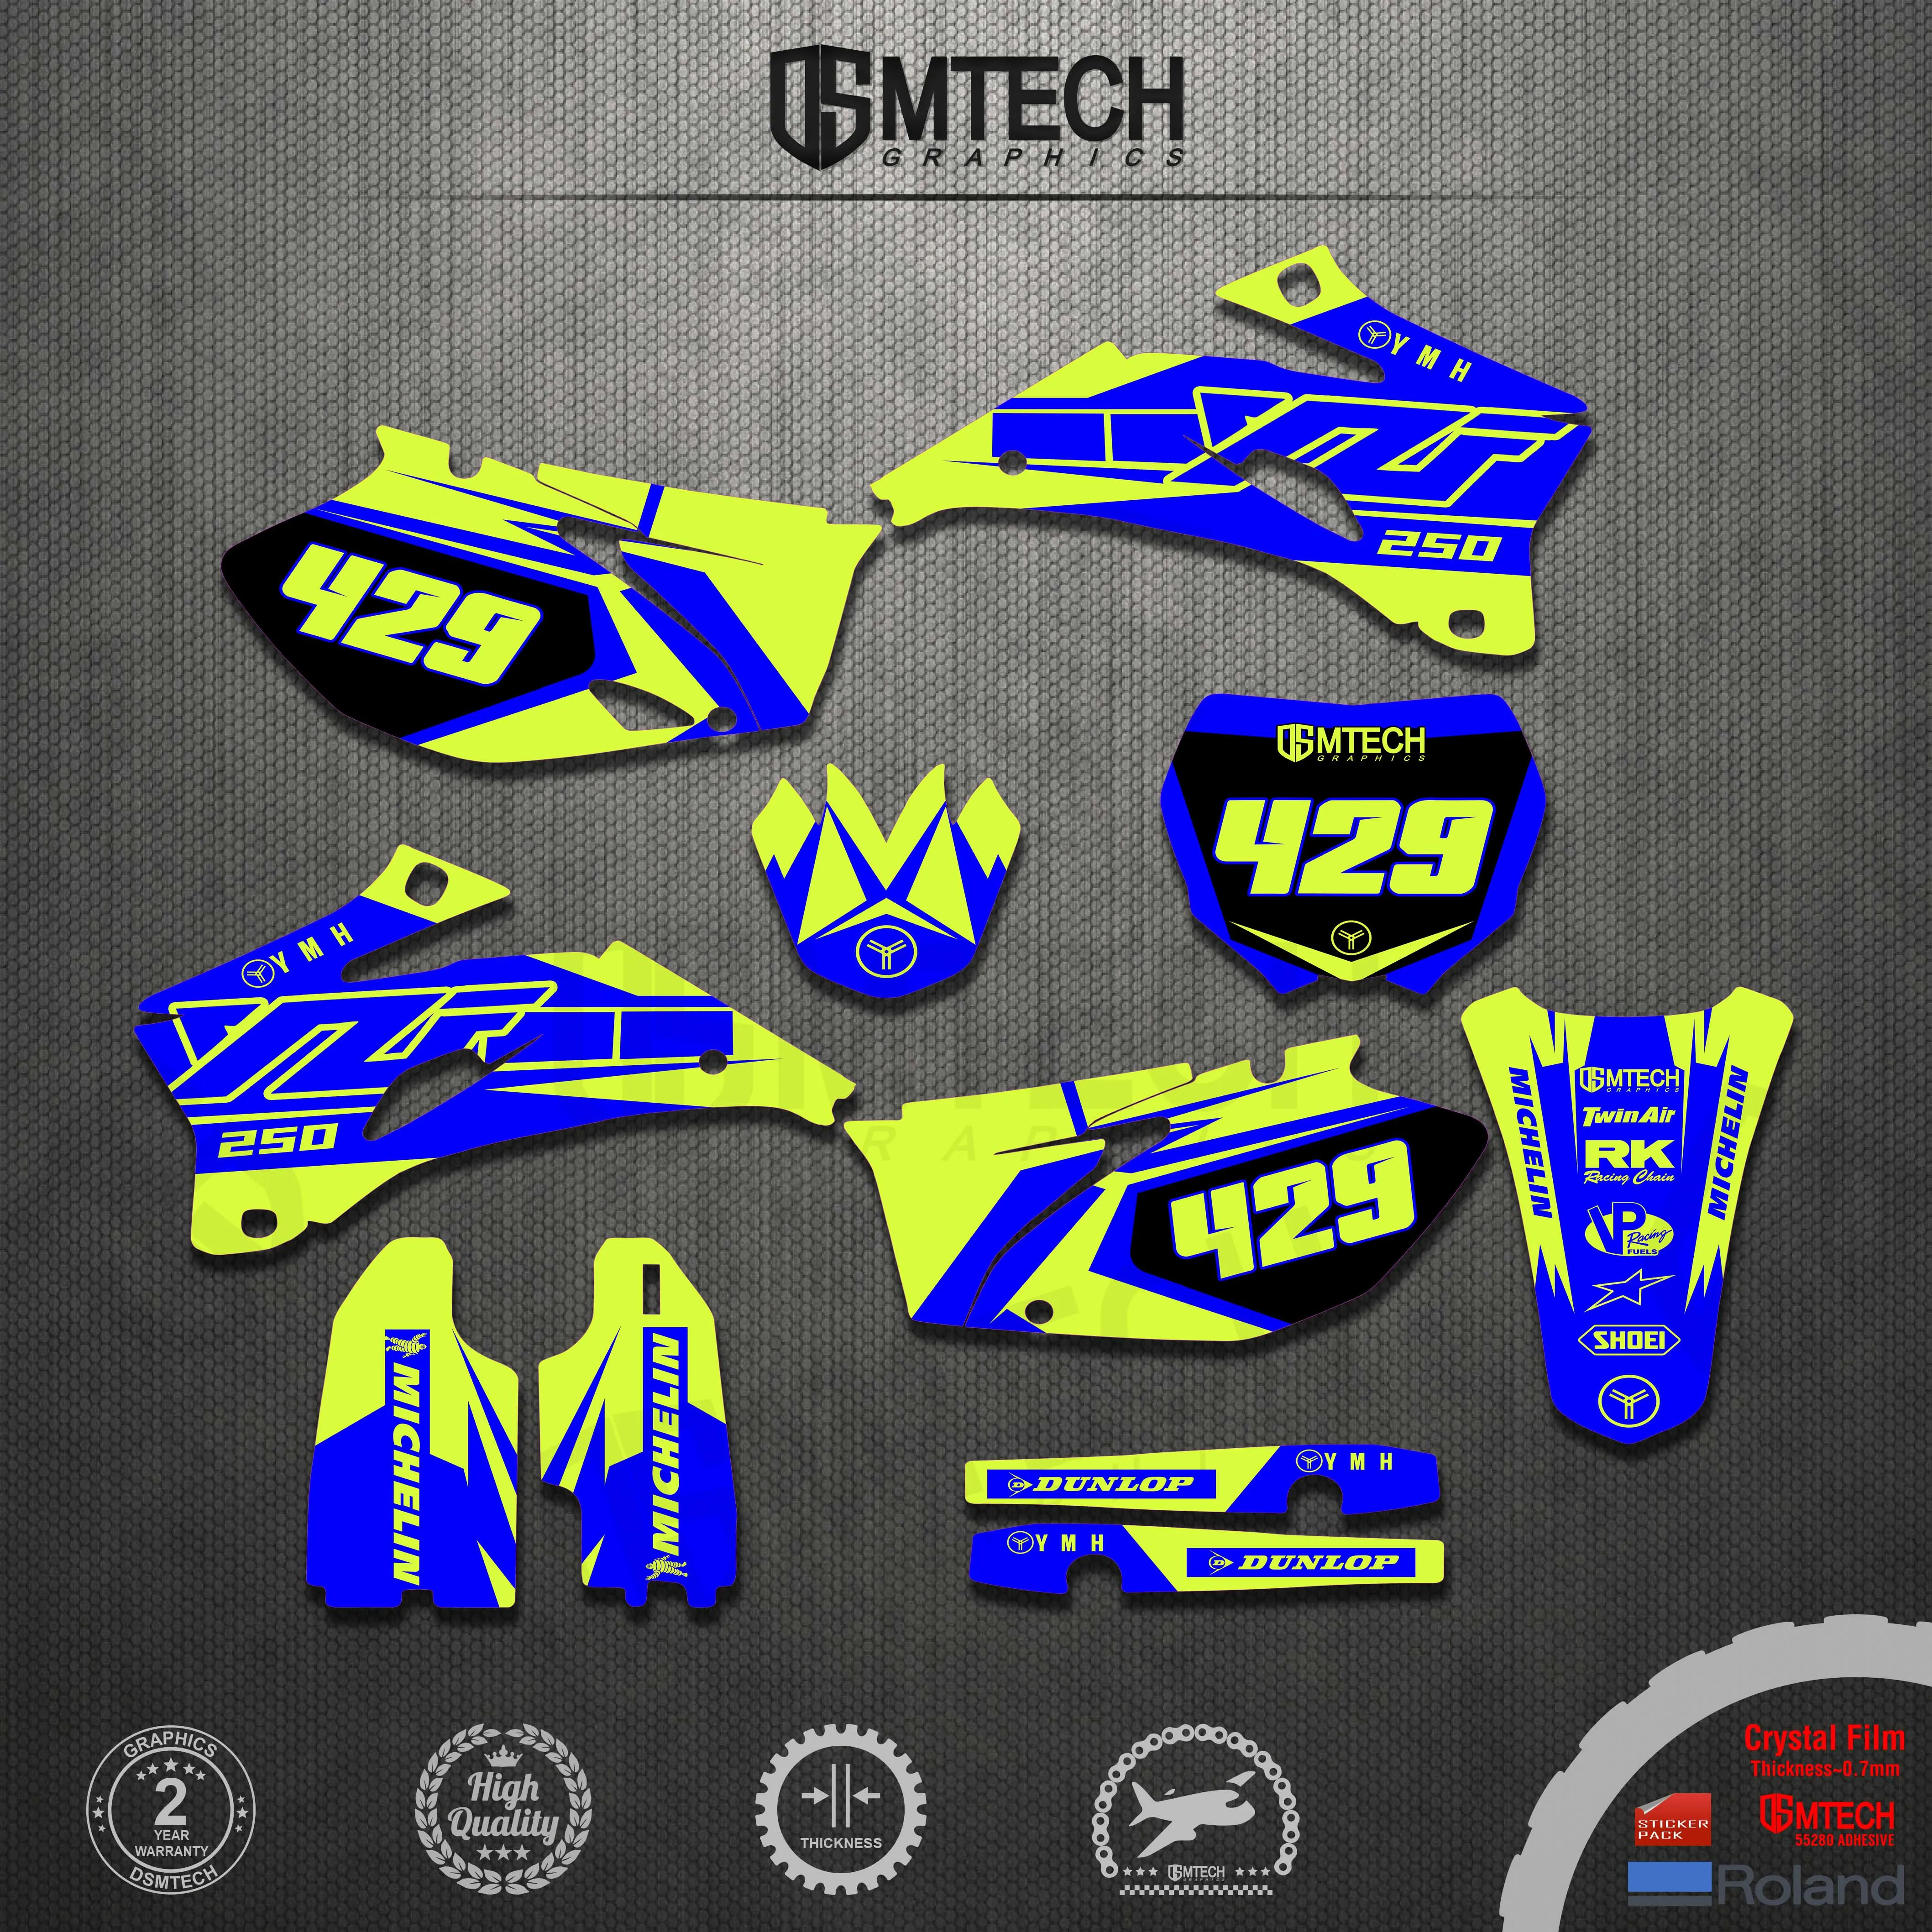 DSMTECH YZF250/450 2009-06  Motorcycle  Decals Stickers Backgrounds Graphics For YAMAHA YZF250 YZ250F 2006 2007 2008 2009